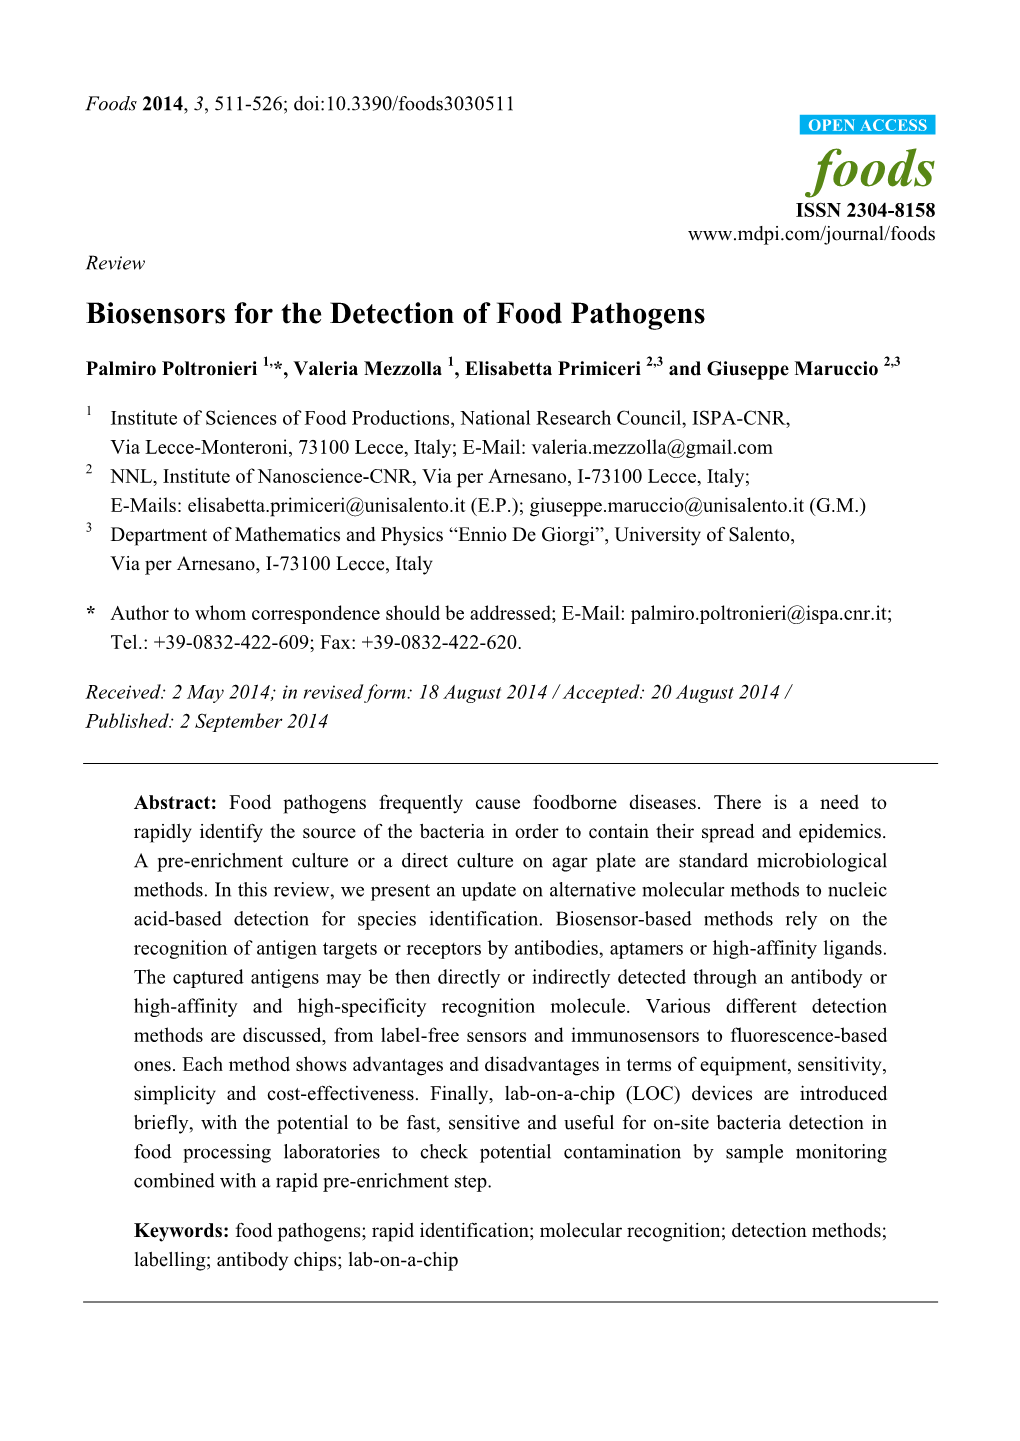 Biosensors for the Detection of Food Pathogens